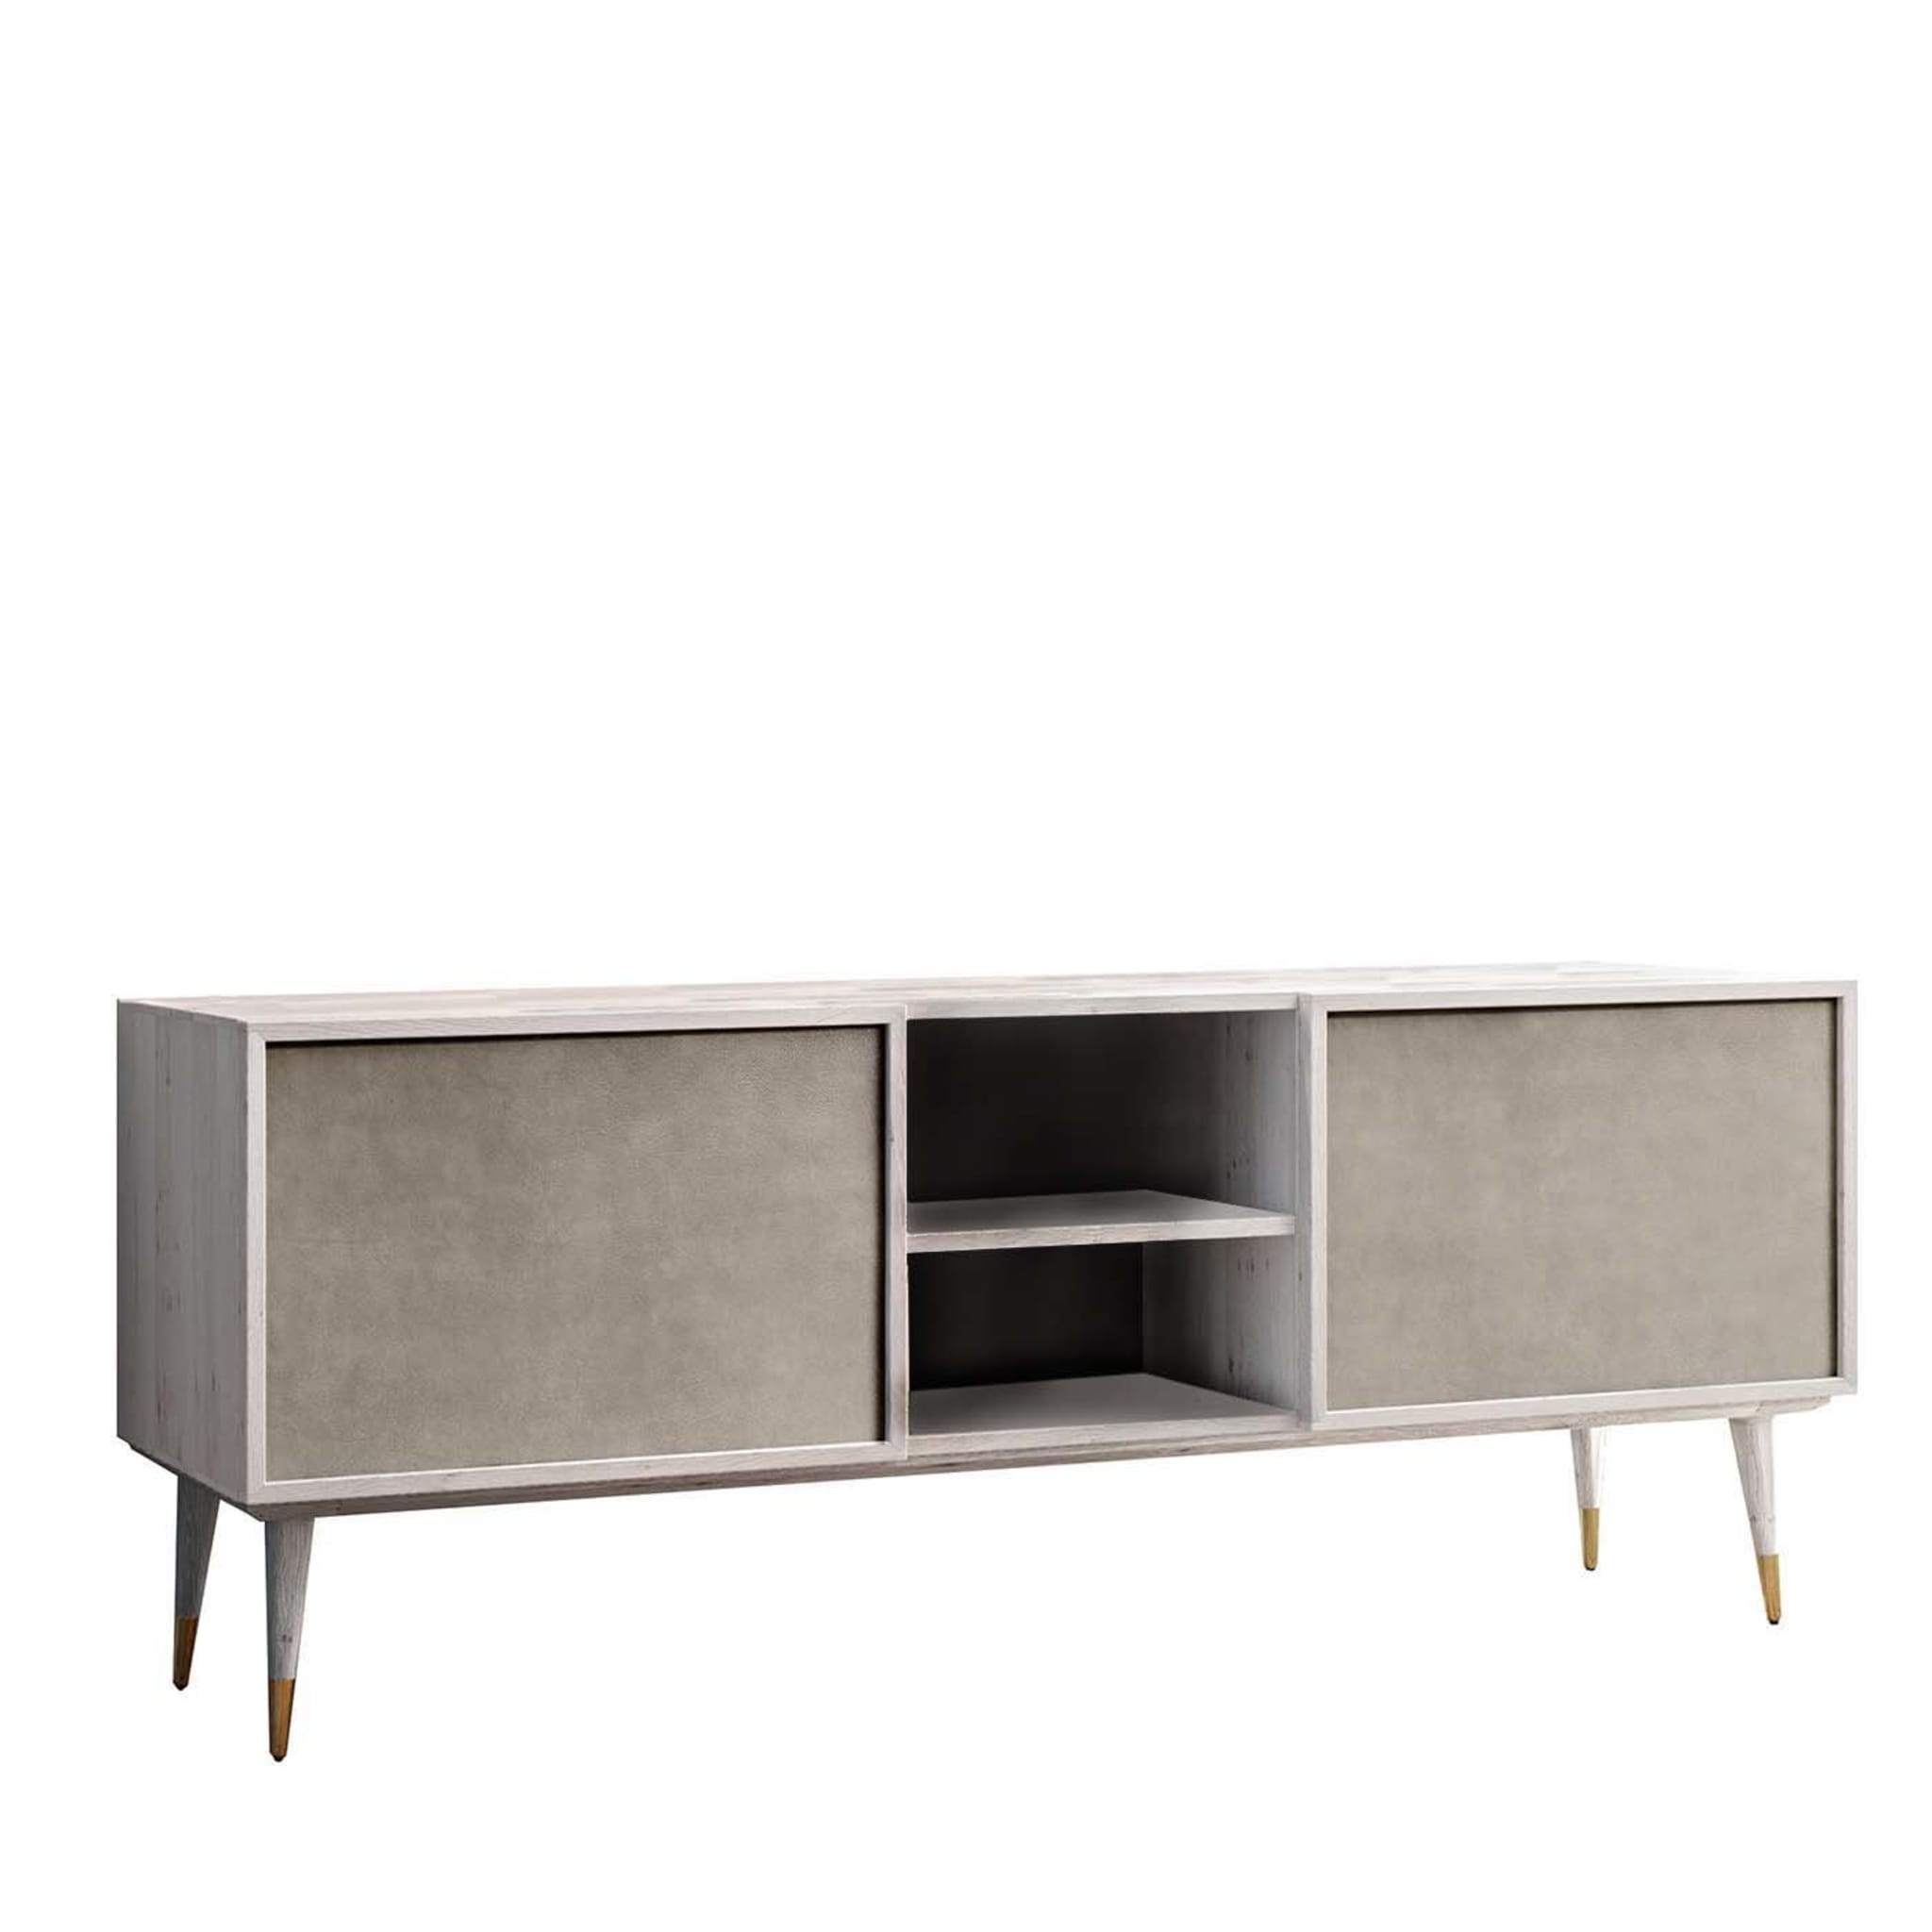 Coco White Sideboard - Main view